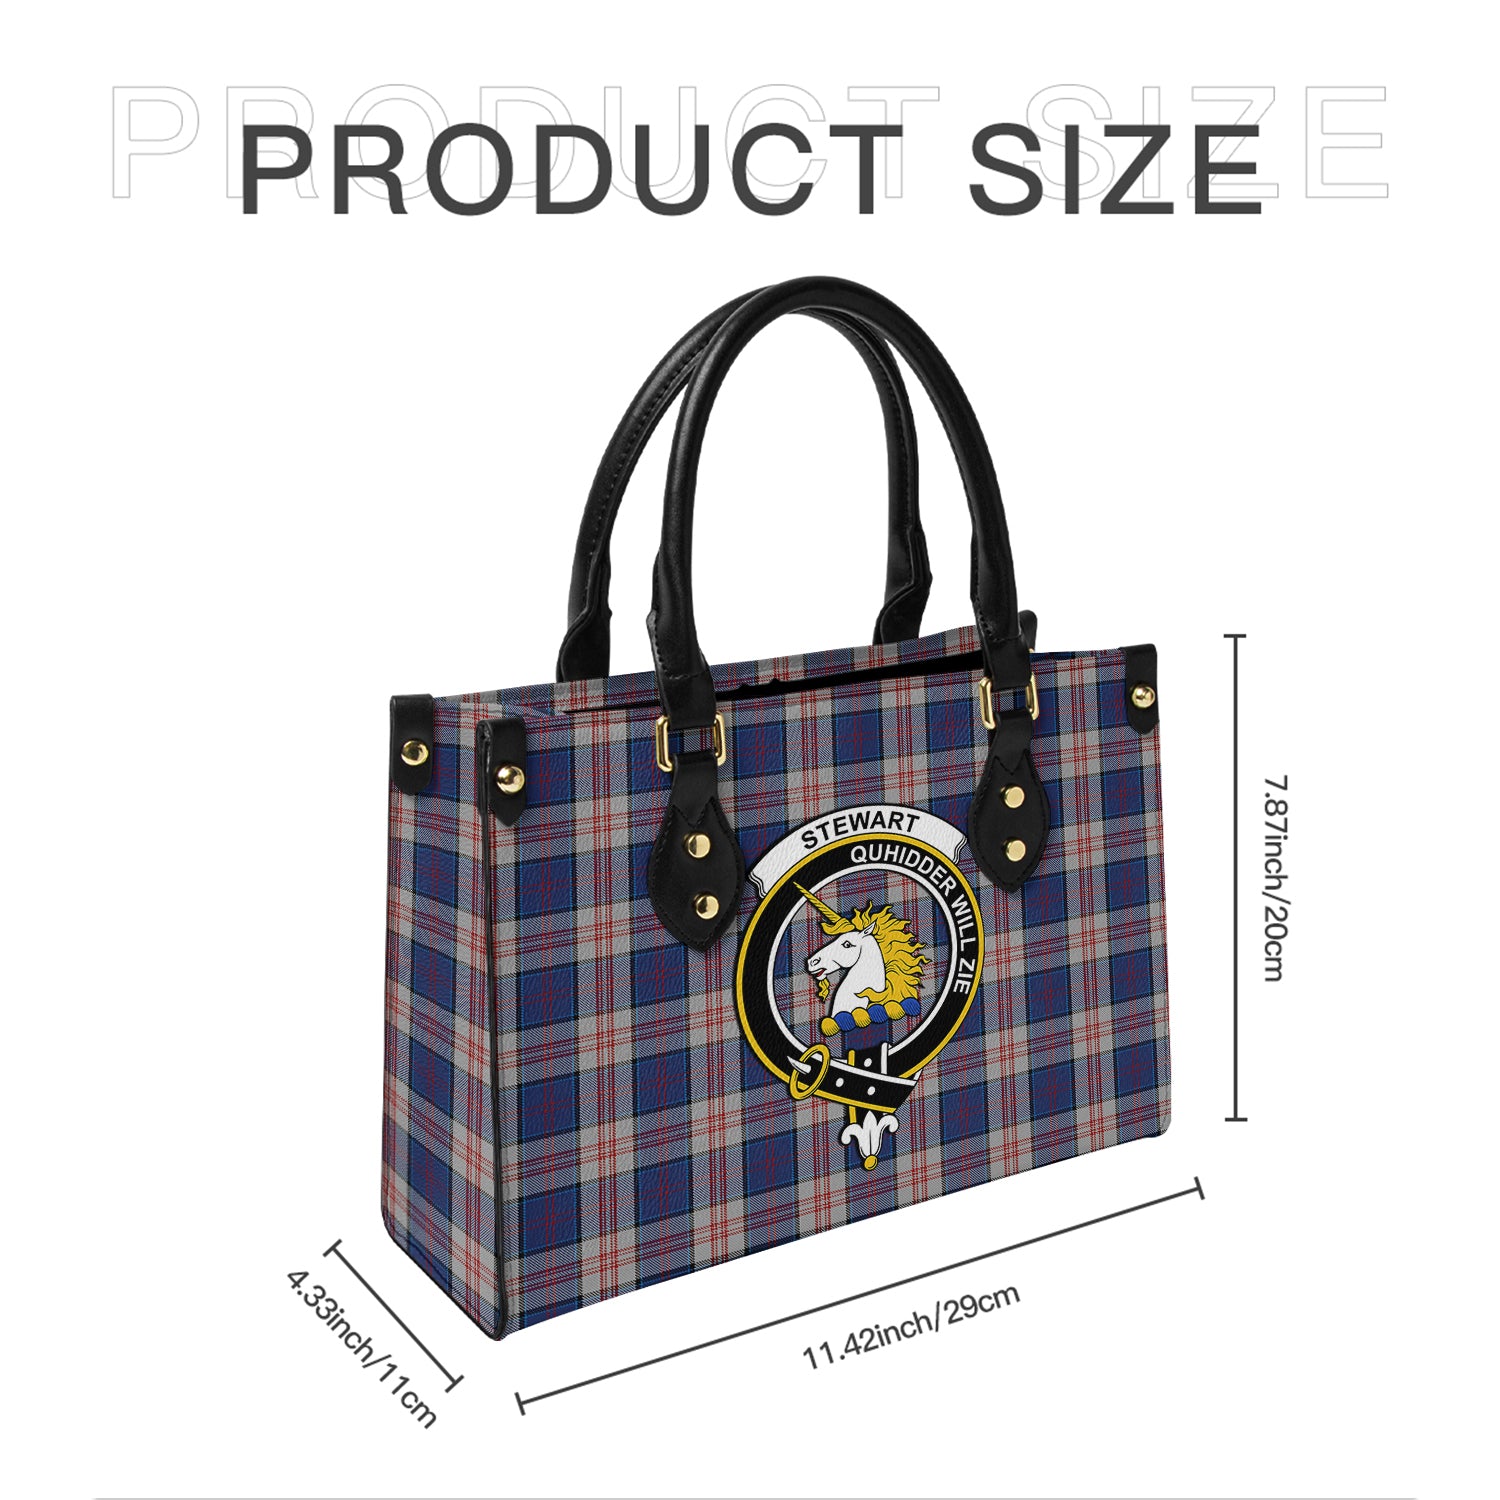 stewart-of-appin-hunting-dress-tartan-leather-bag-with-family-crest